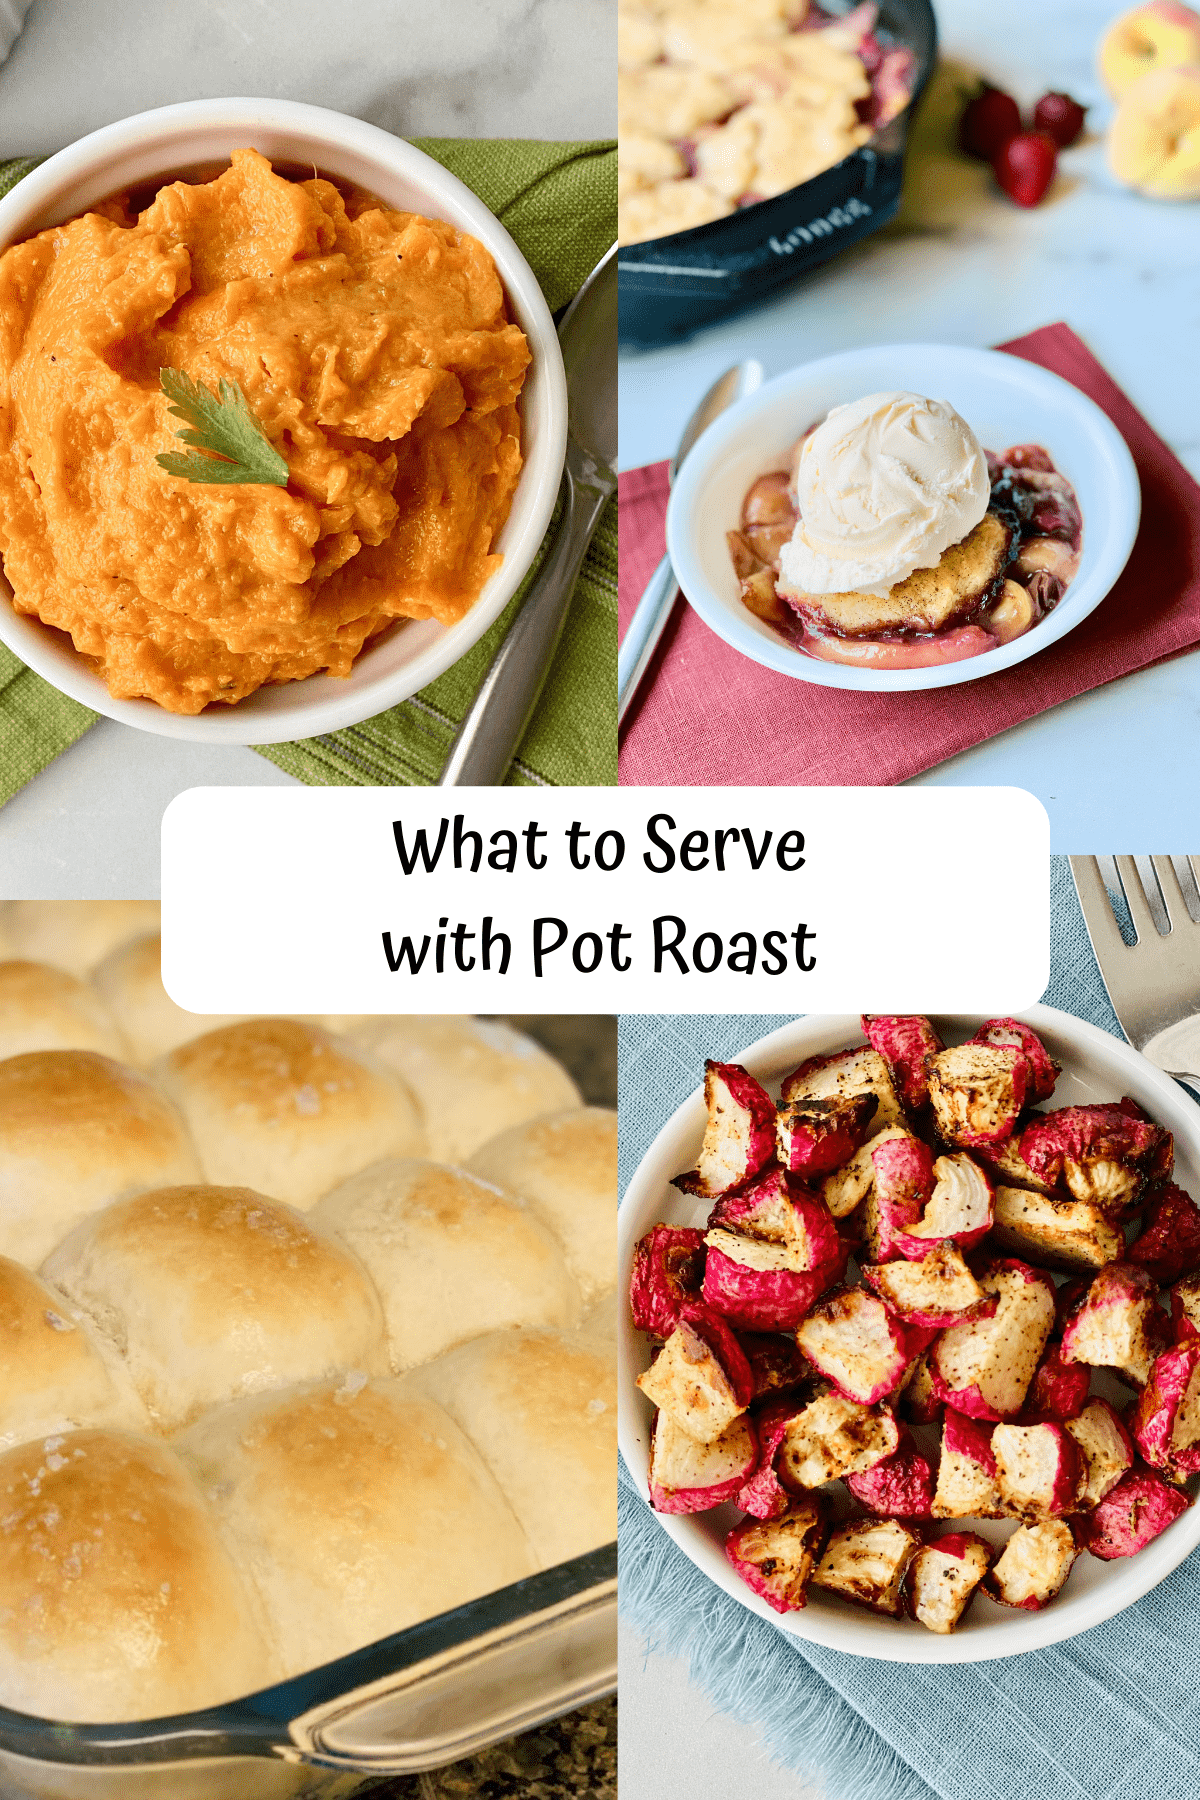 4 recipe images for whipped sweet potatoes, peach cobbler, dinner rolls, air fryer radishes.